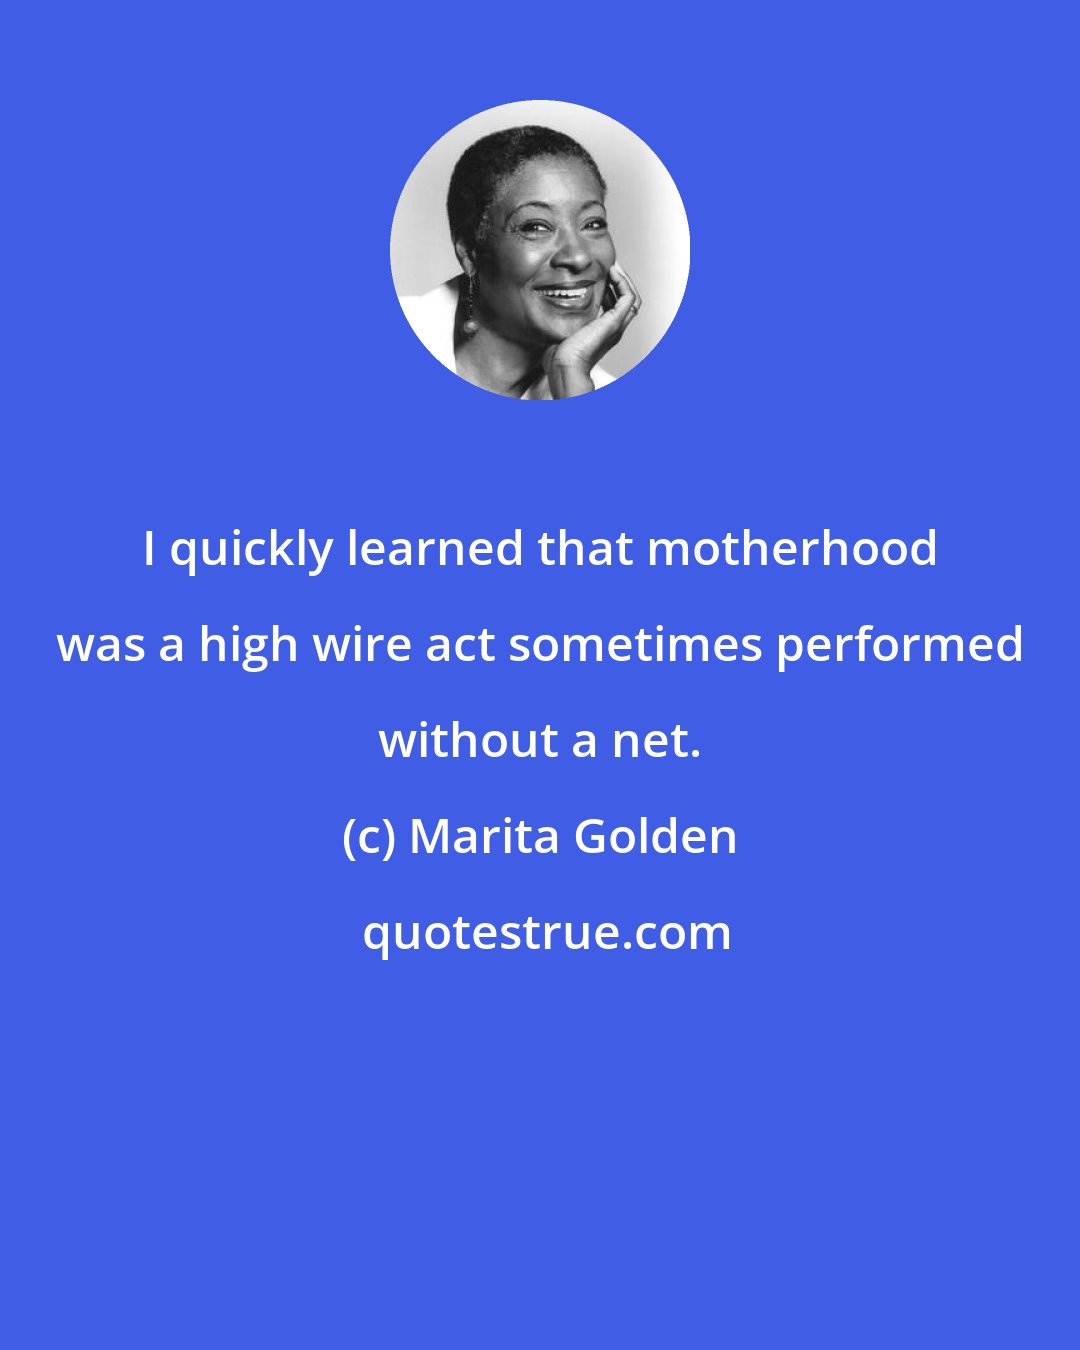 Marita Golden: I quickly learned that motherhood was a high wire act sometimes performed without a net.